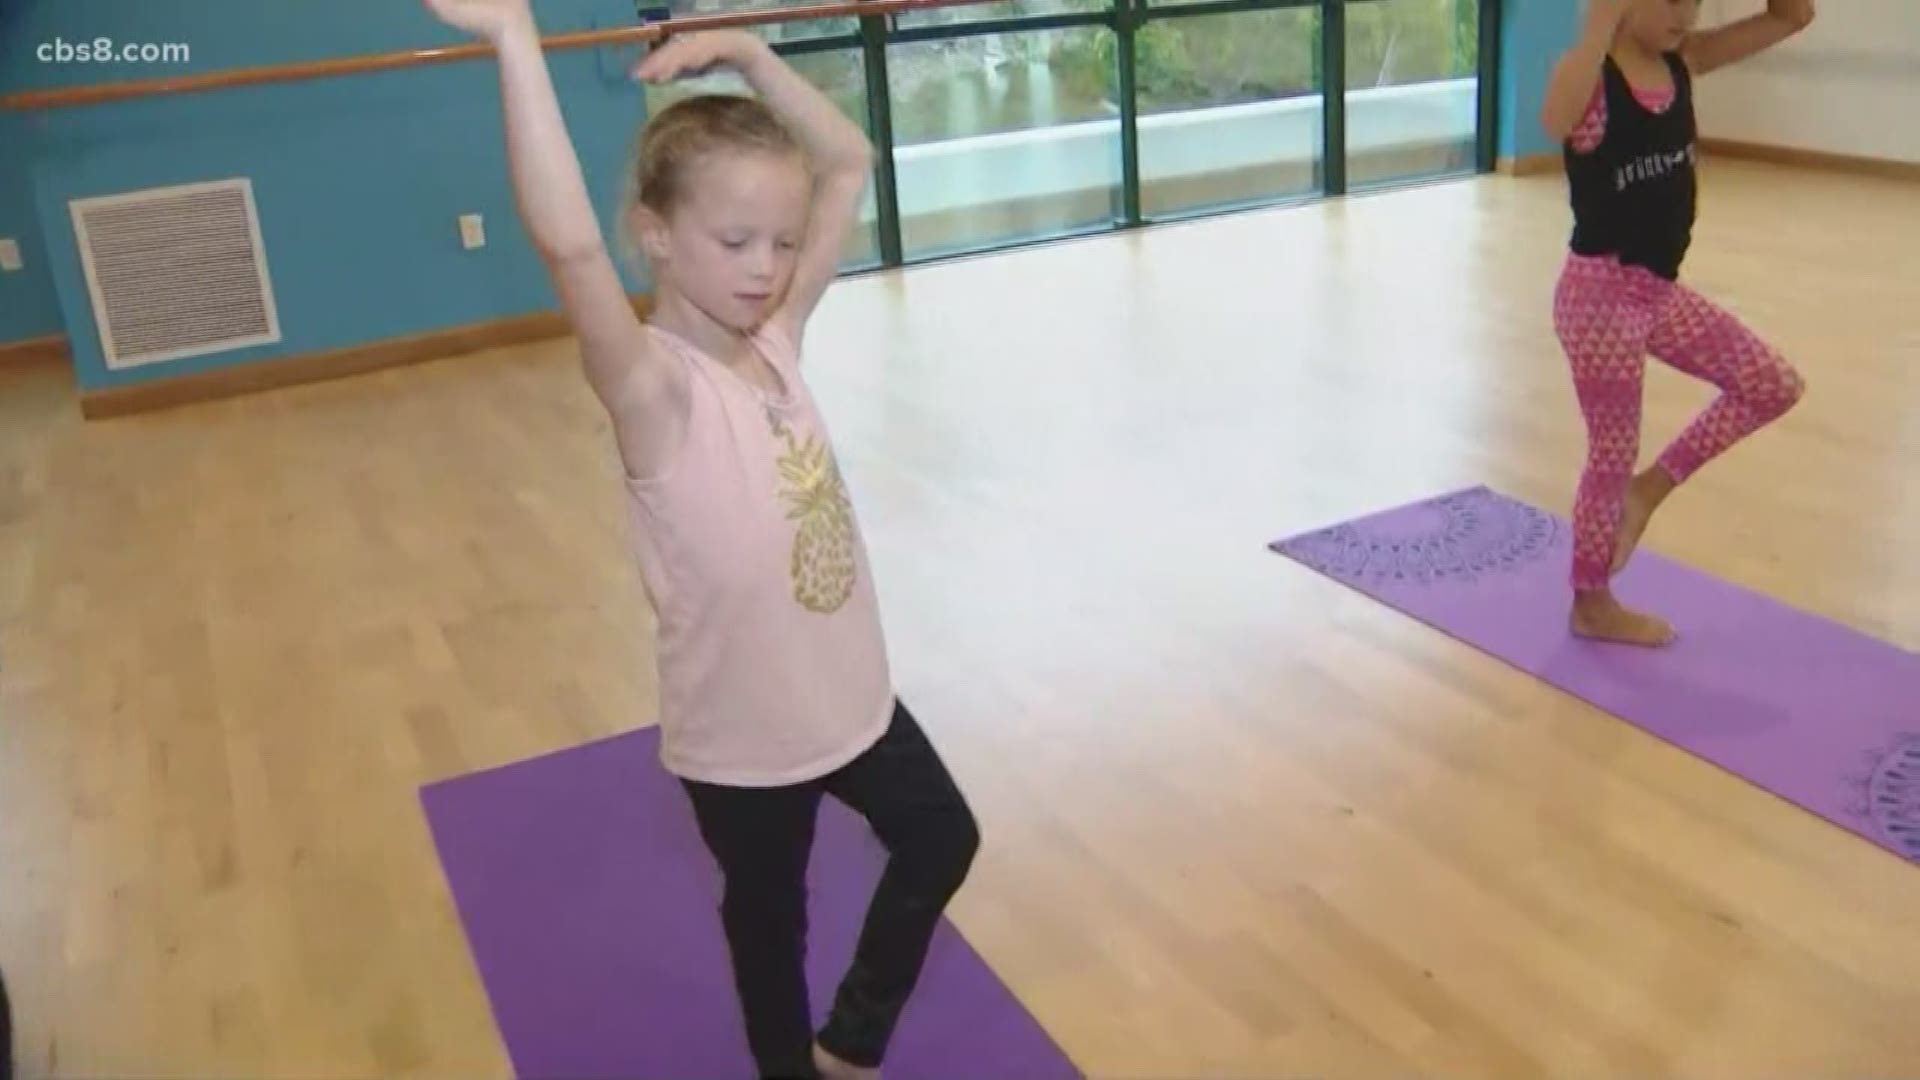 Enroll your child in a yoga class while you are working out in the other room.